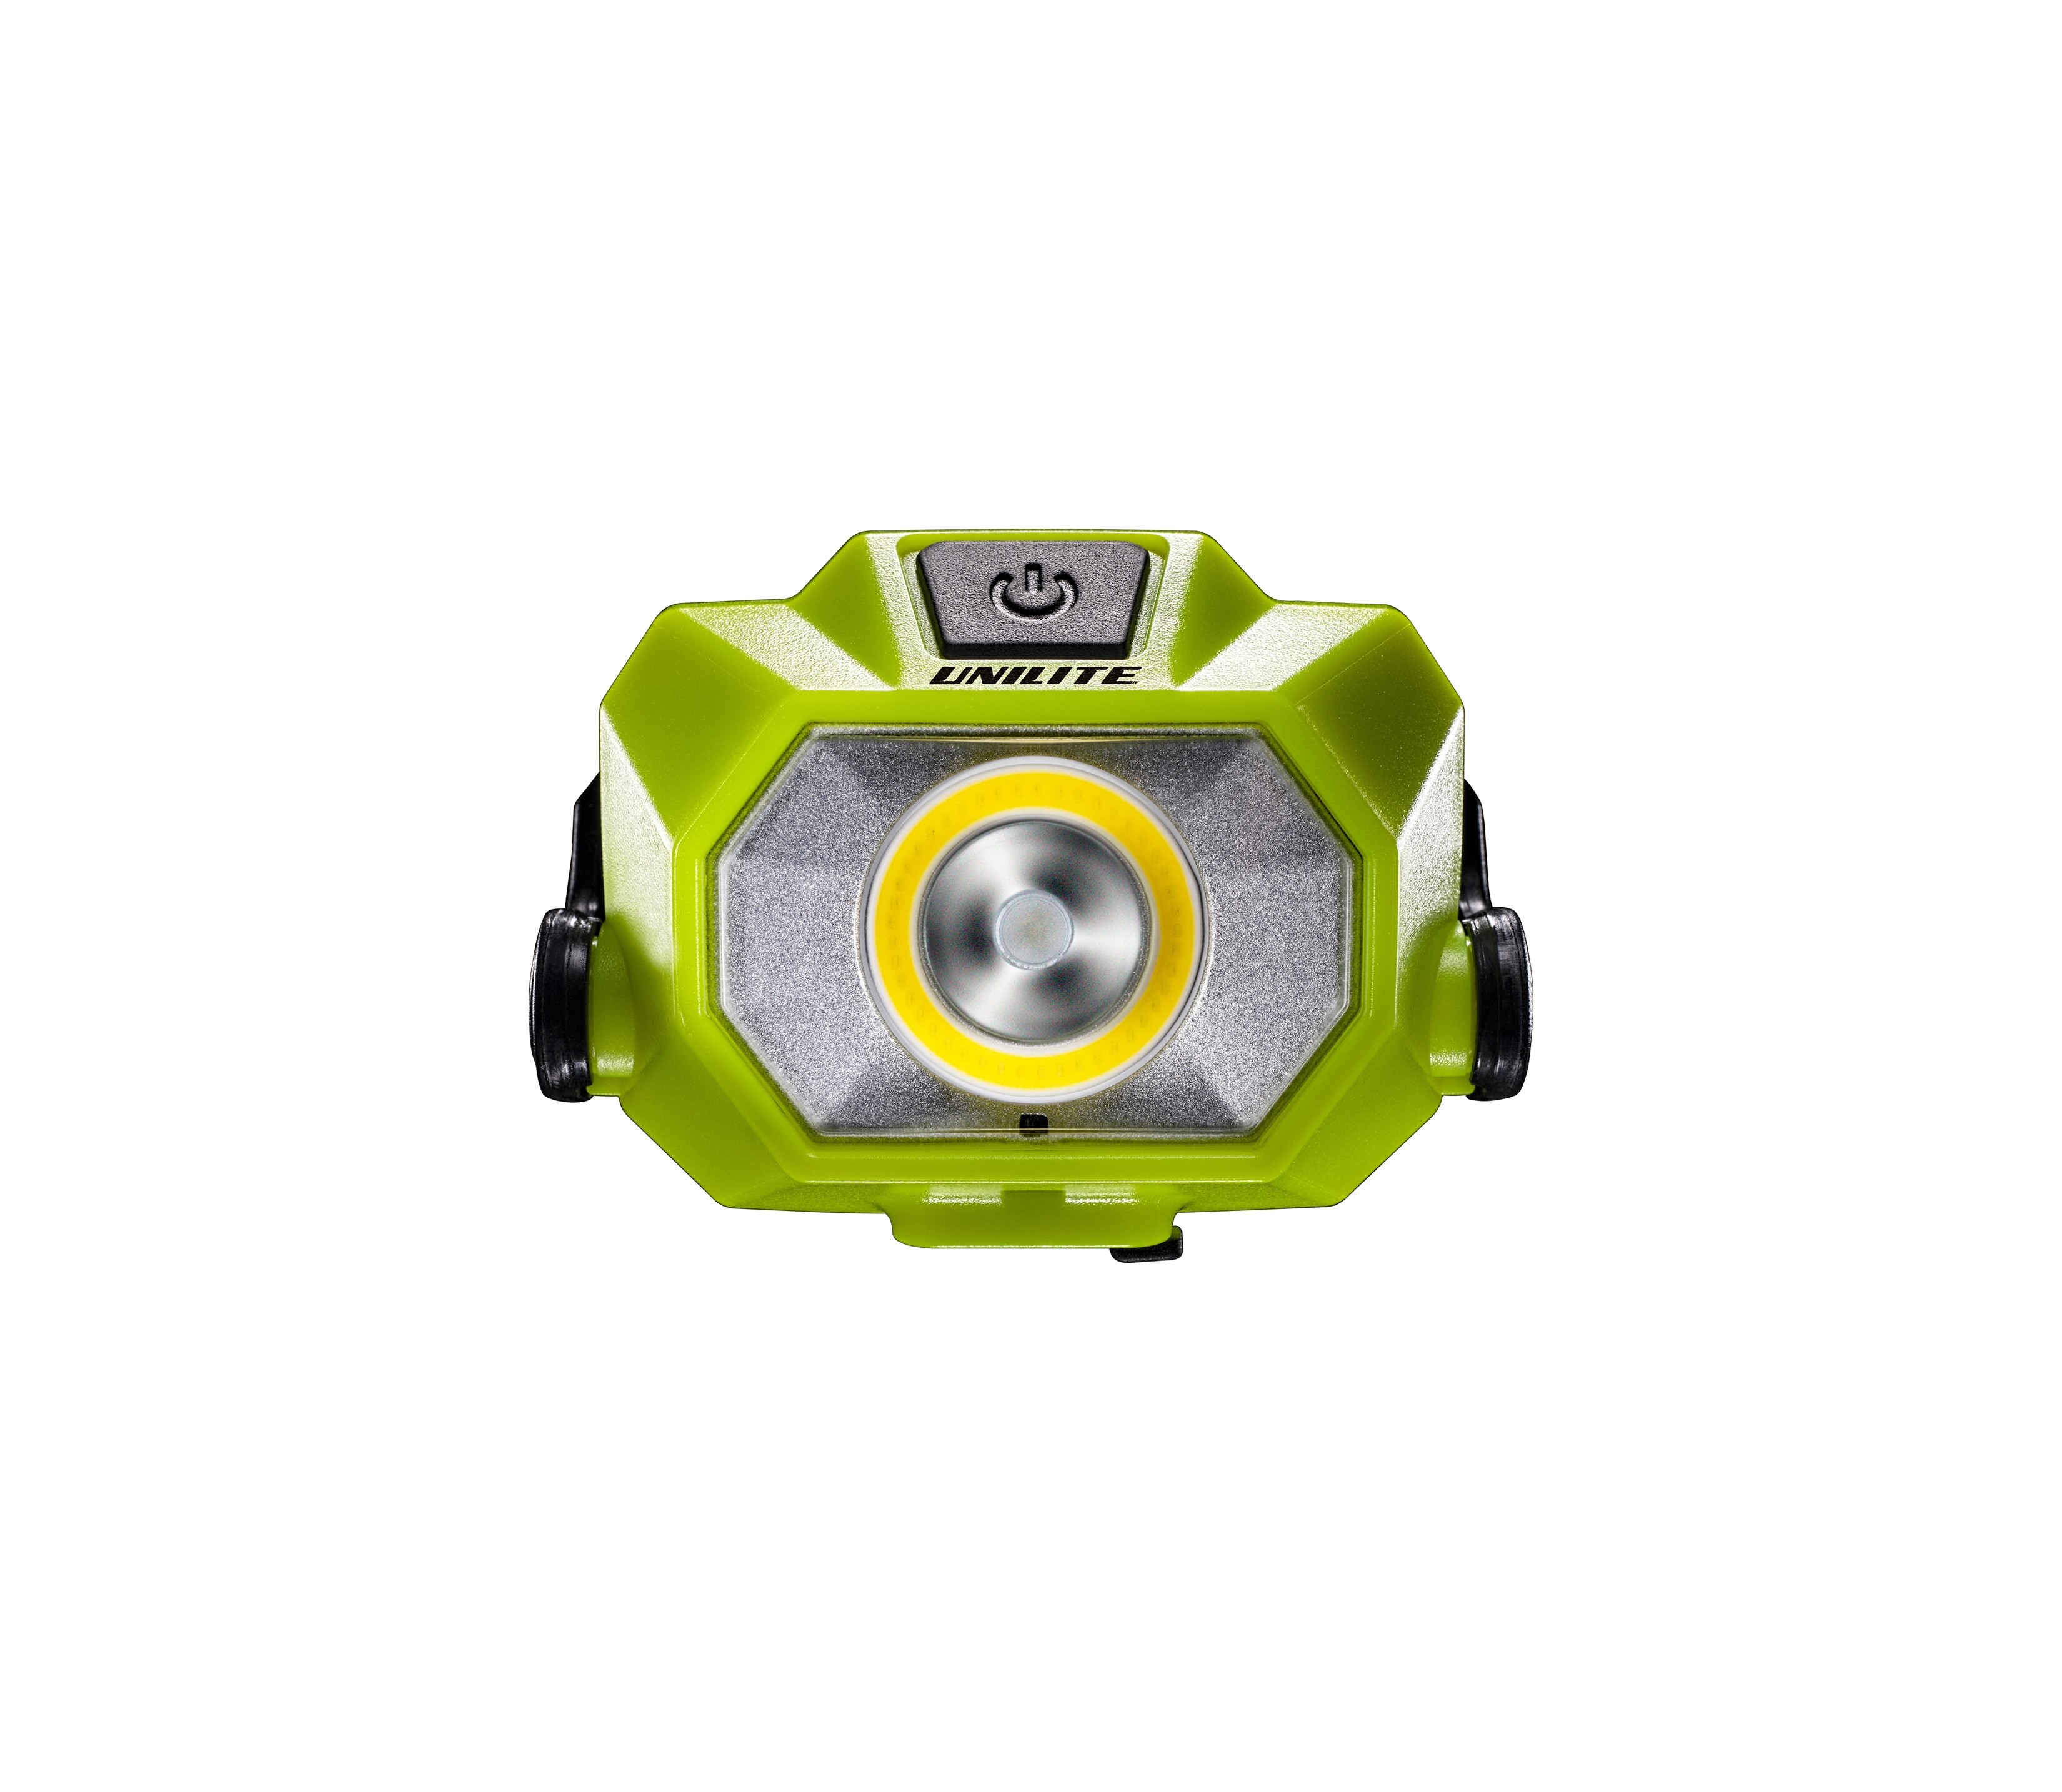 Unilite WCHT5 Wireless Charge Headtorch